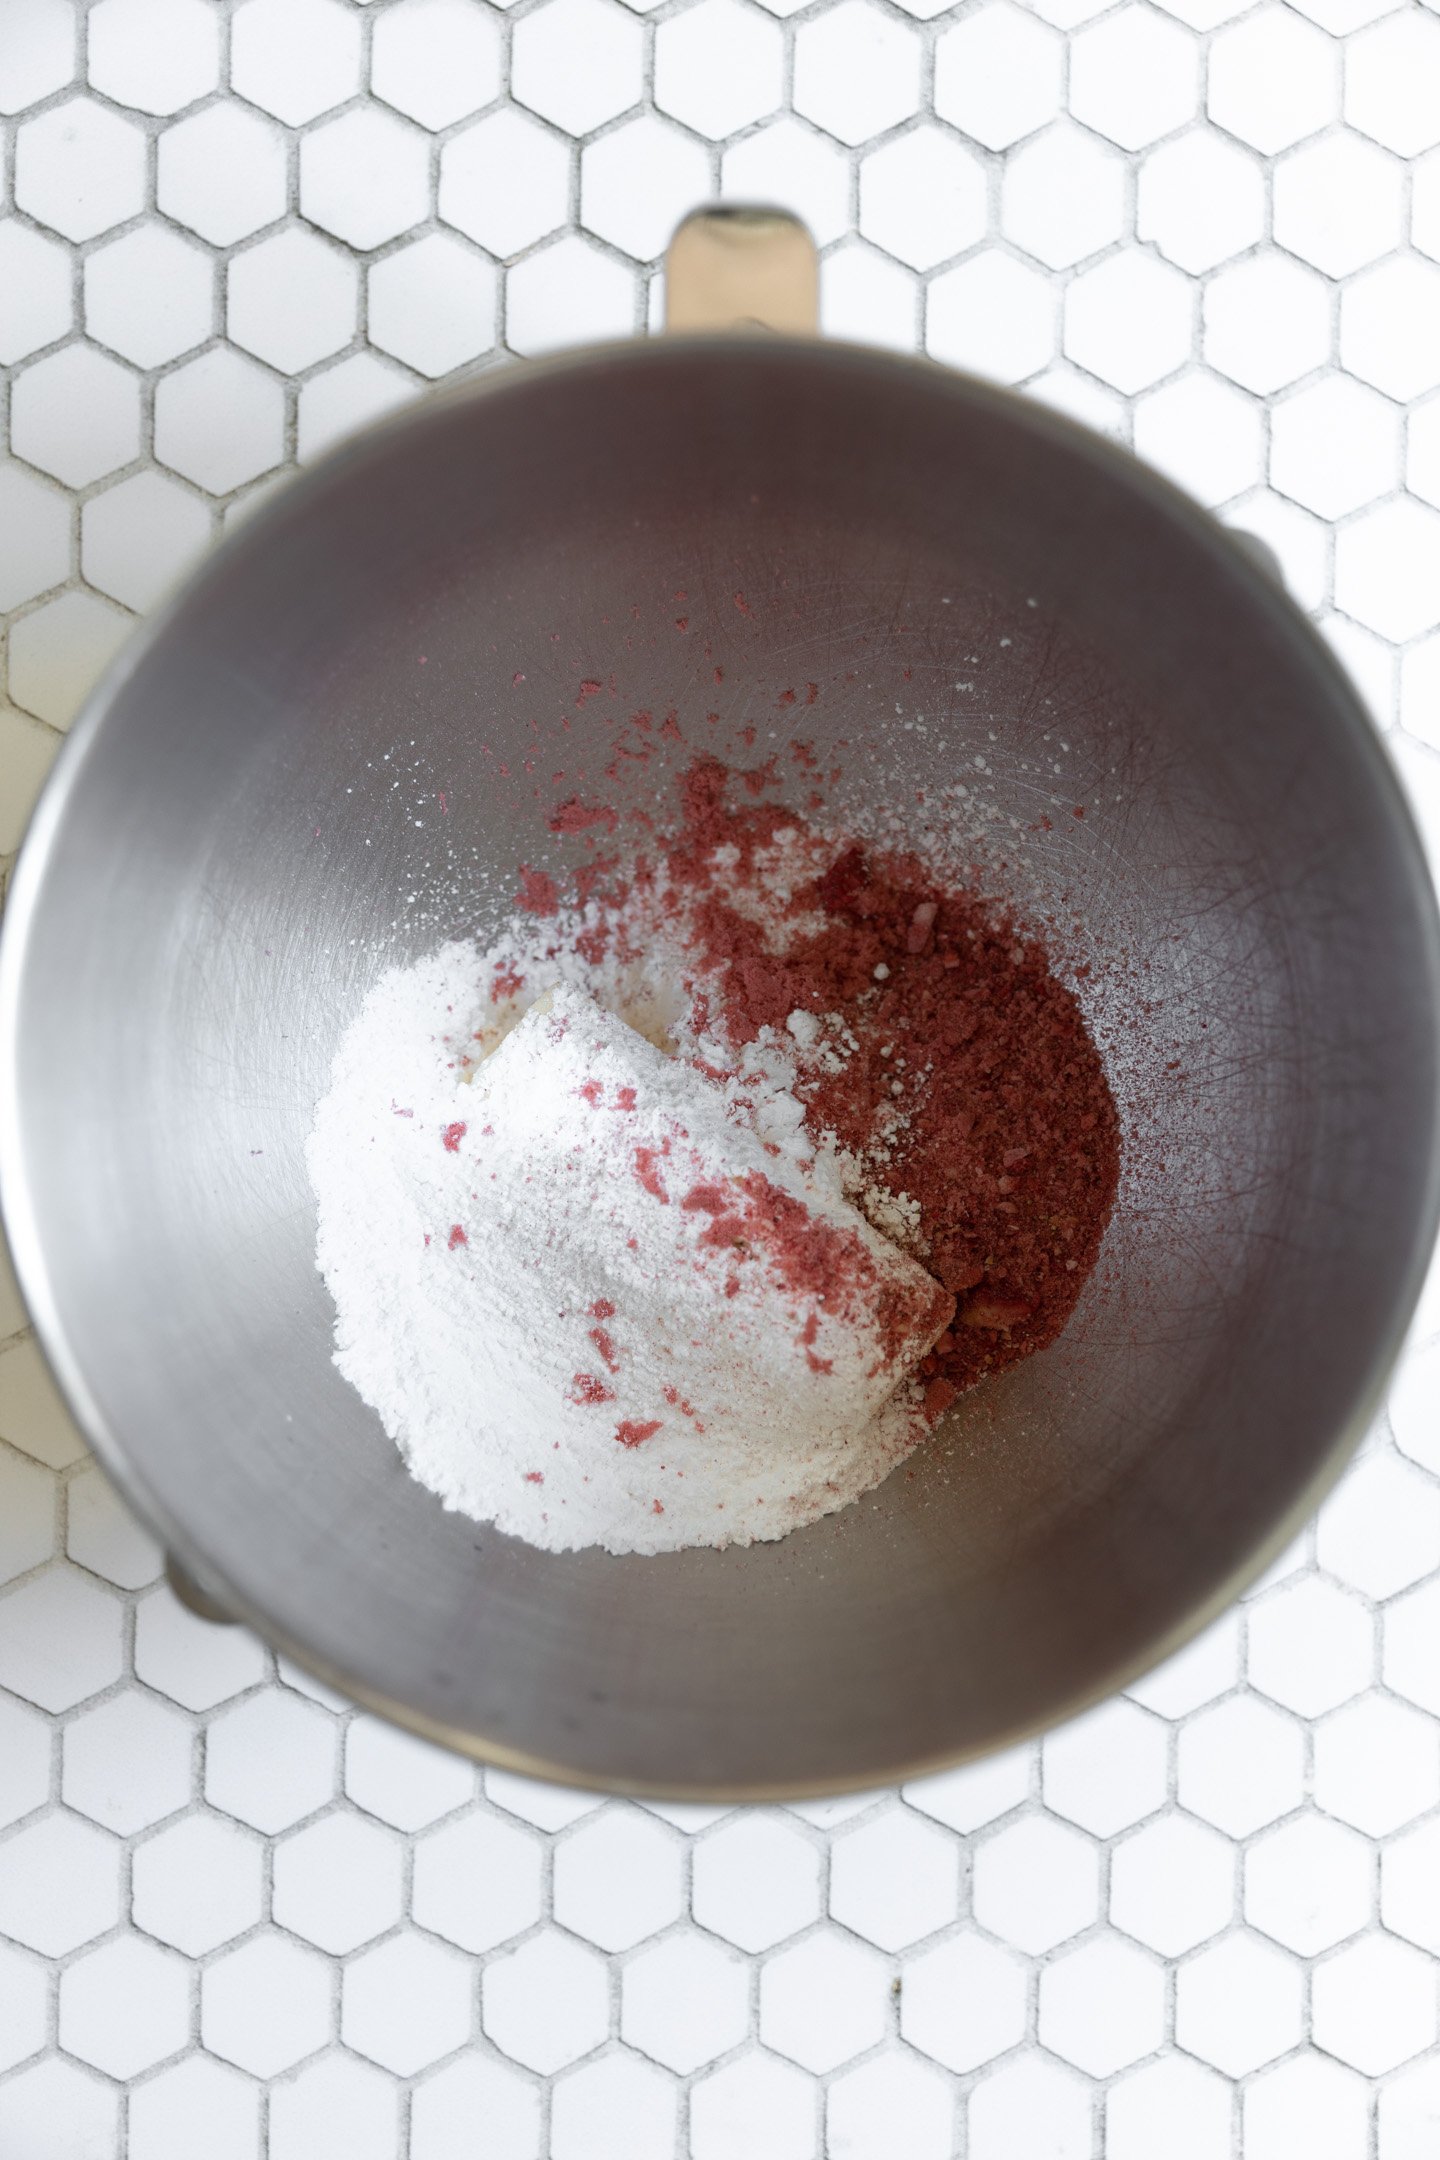 Powdered sugar and freeze dried strawberries in a mixing bowl.